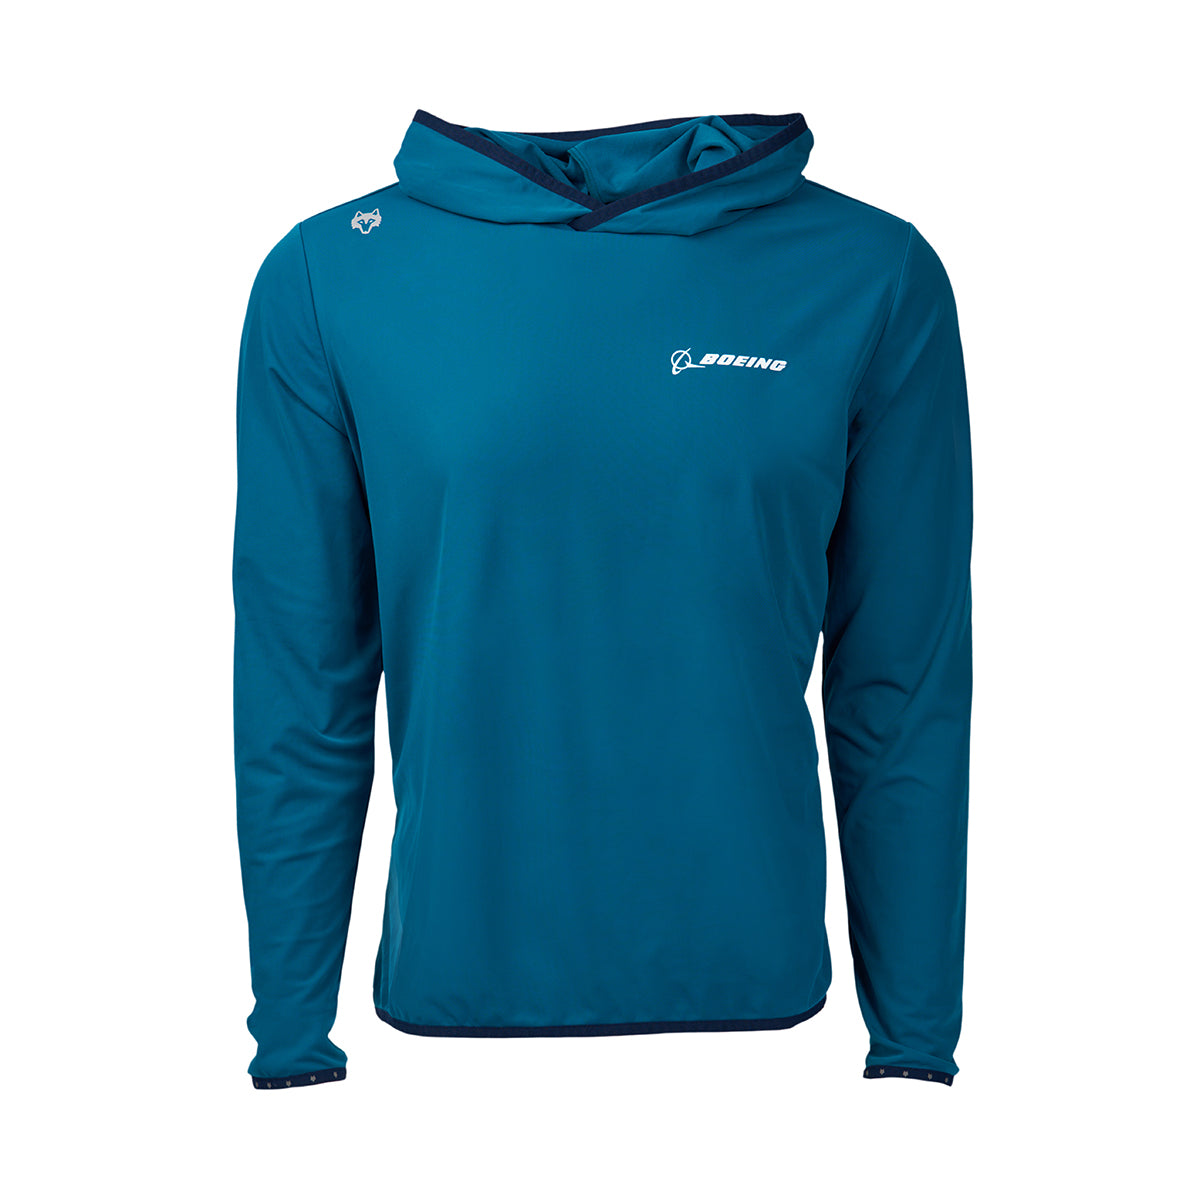 Full product image of the hoodie in a sea turtle green color. White Boeing logo on left chest.  Greyson logo on front right shoulder area. 